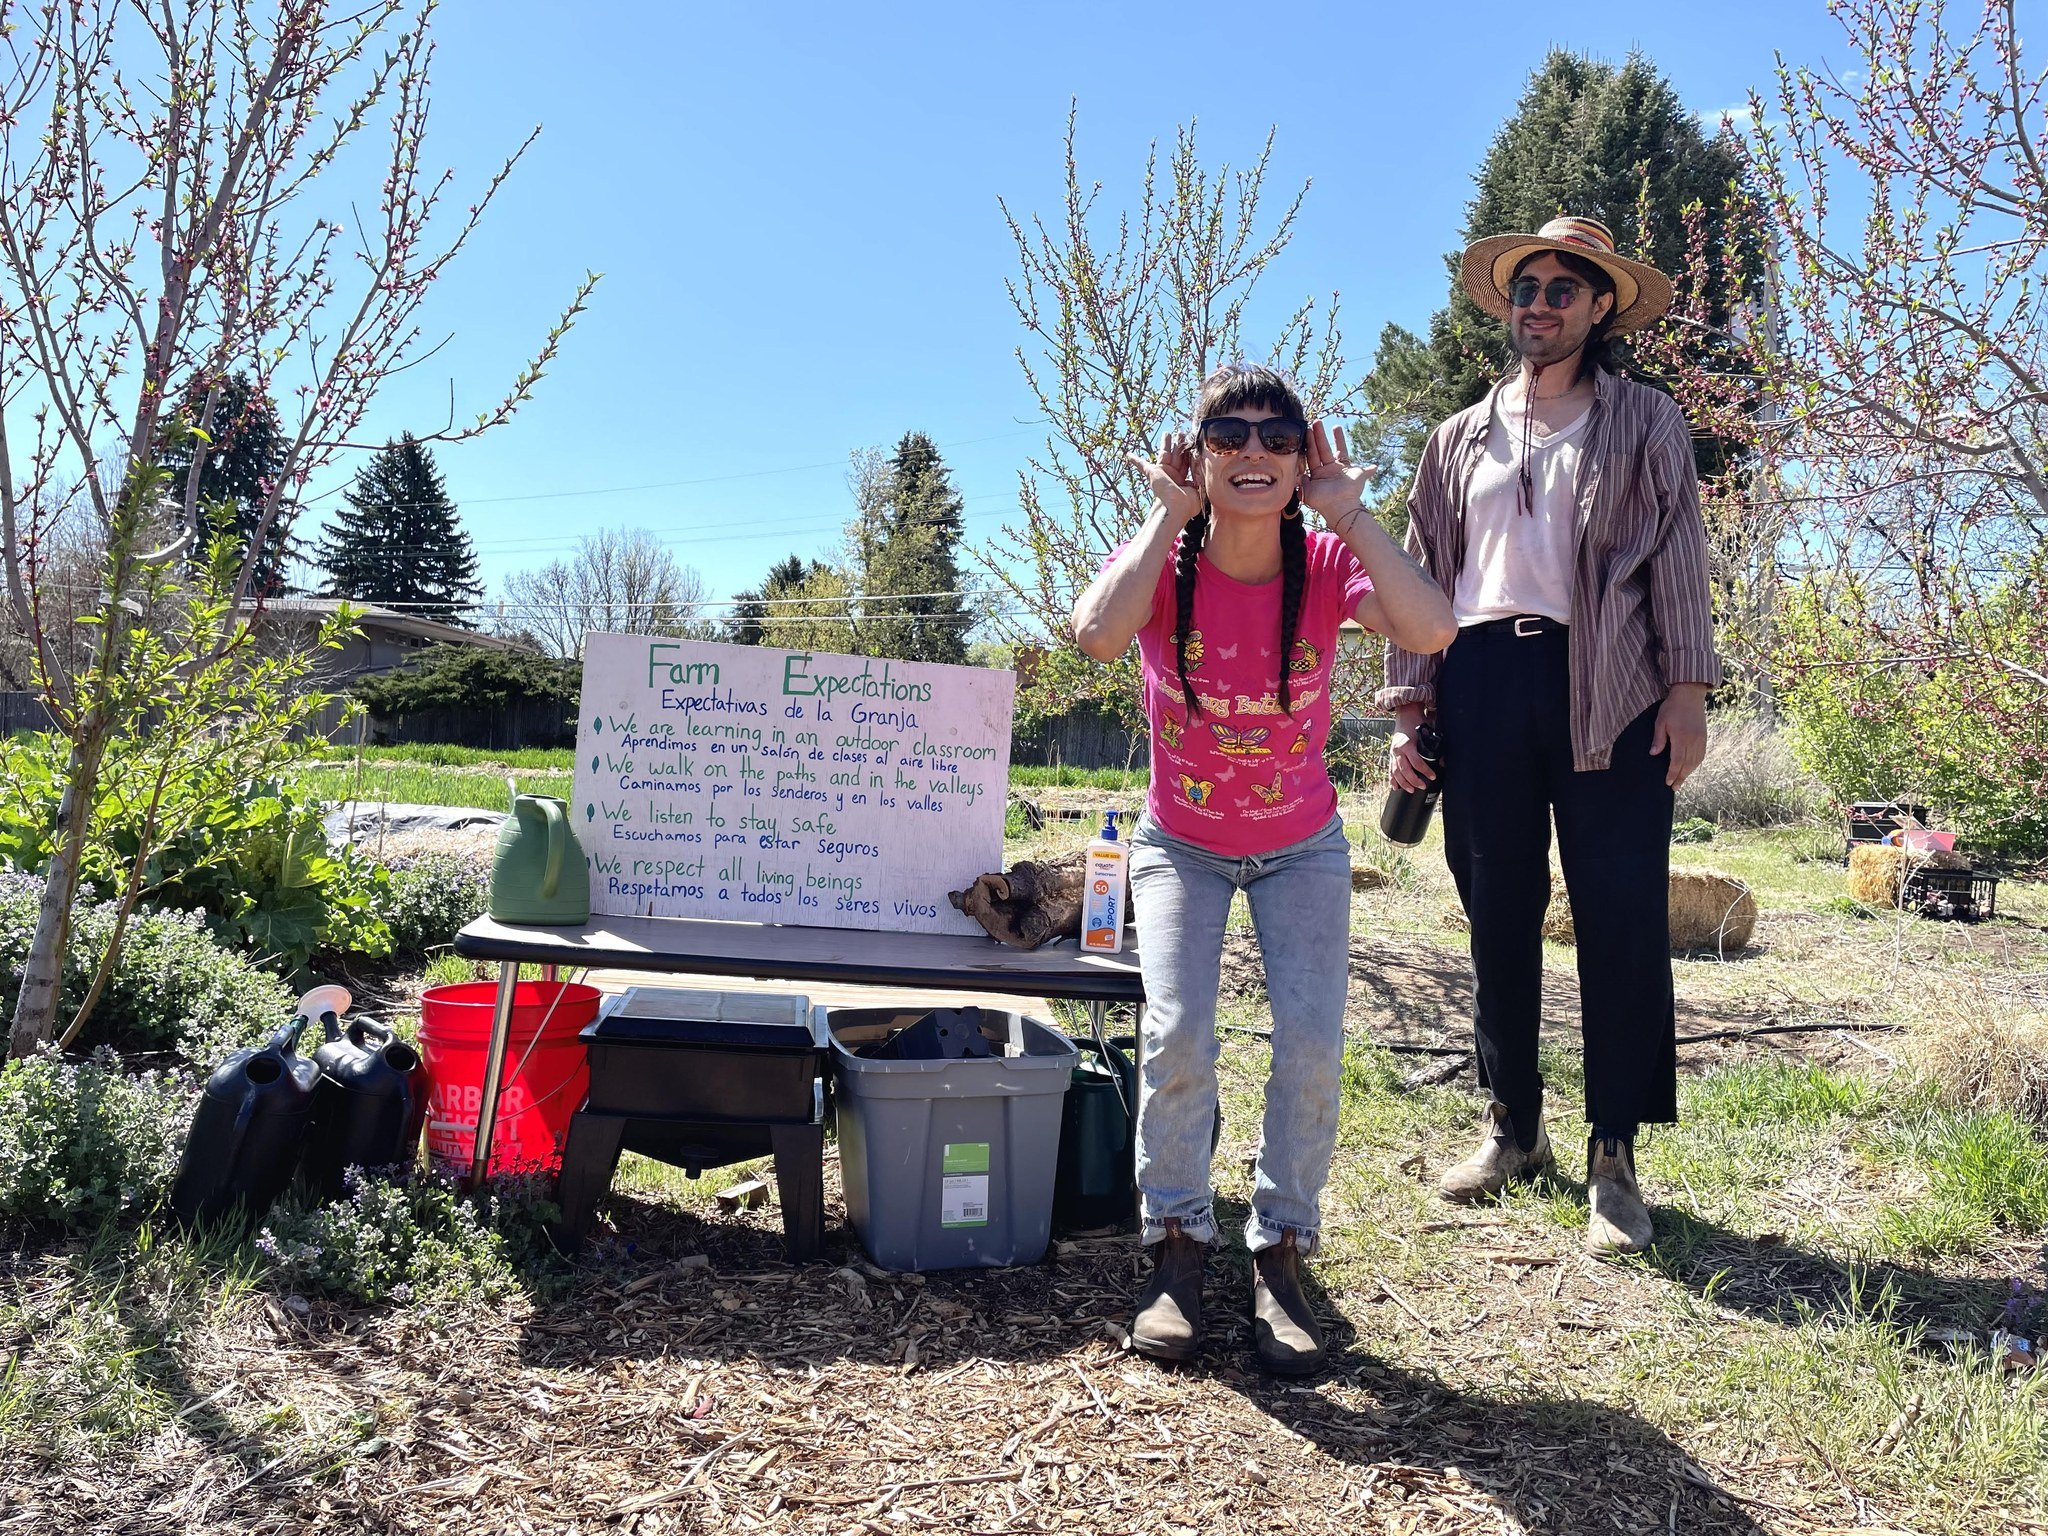 It's potato planting season at Denver Green School Community Farm!! 

One of the many benefits of having a community farm on school grounds means that students get to experience the farm as an outdoor classroom, and getting dirty gets to be a form of